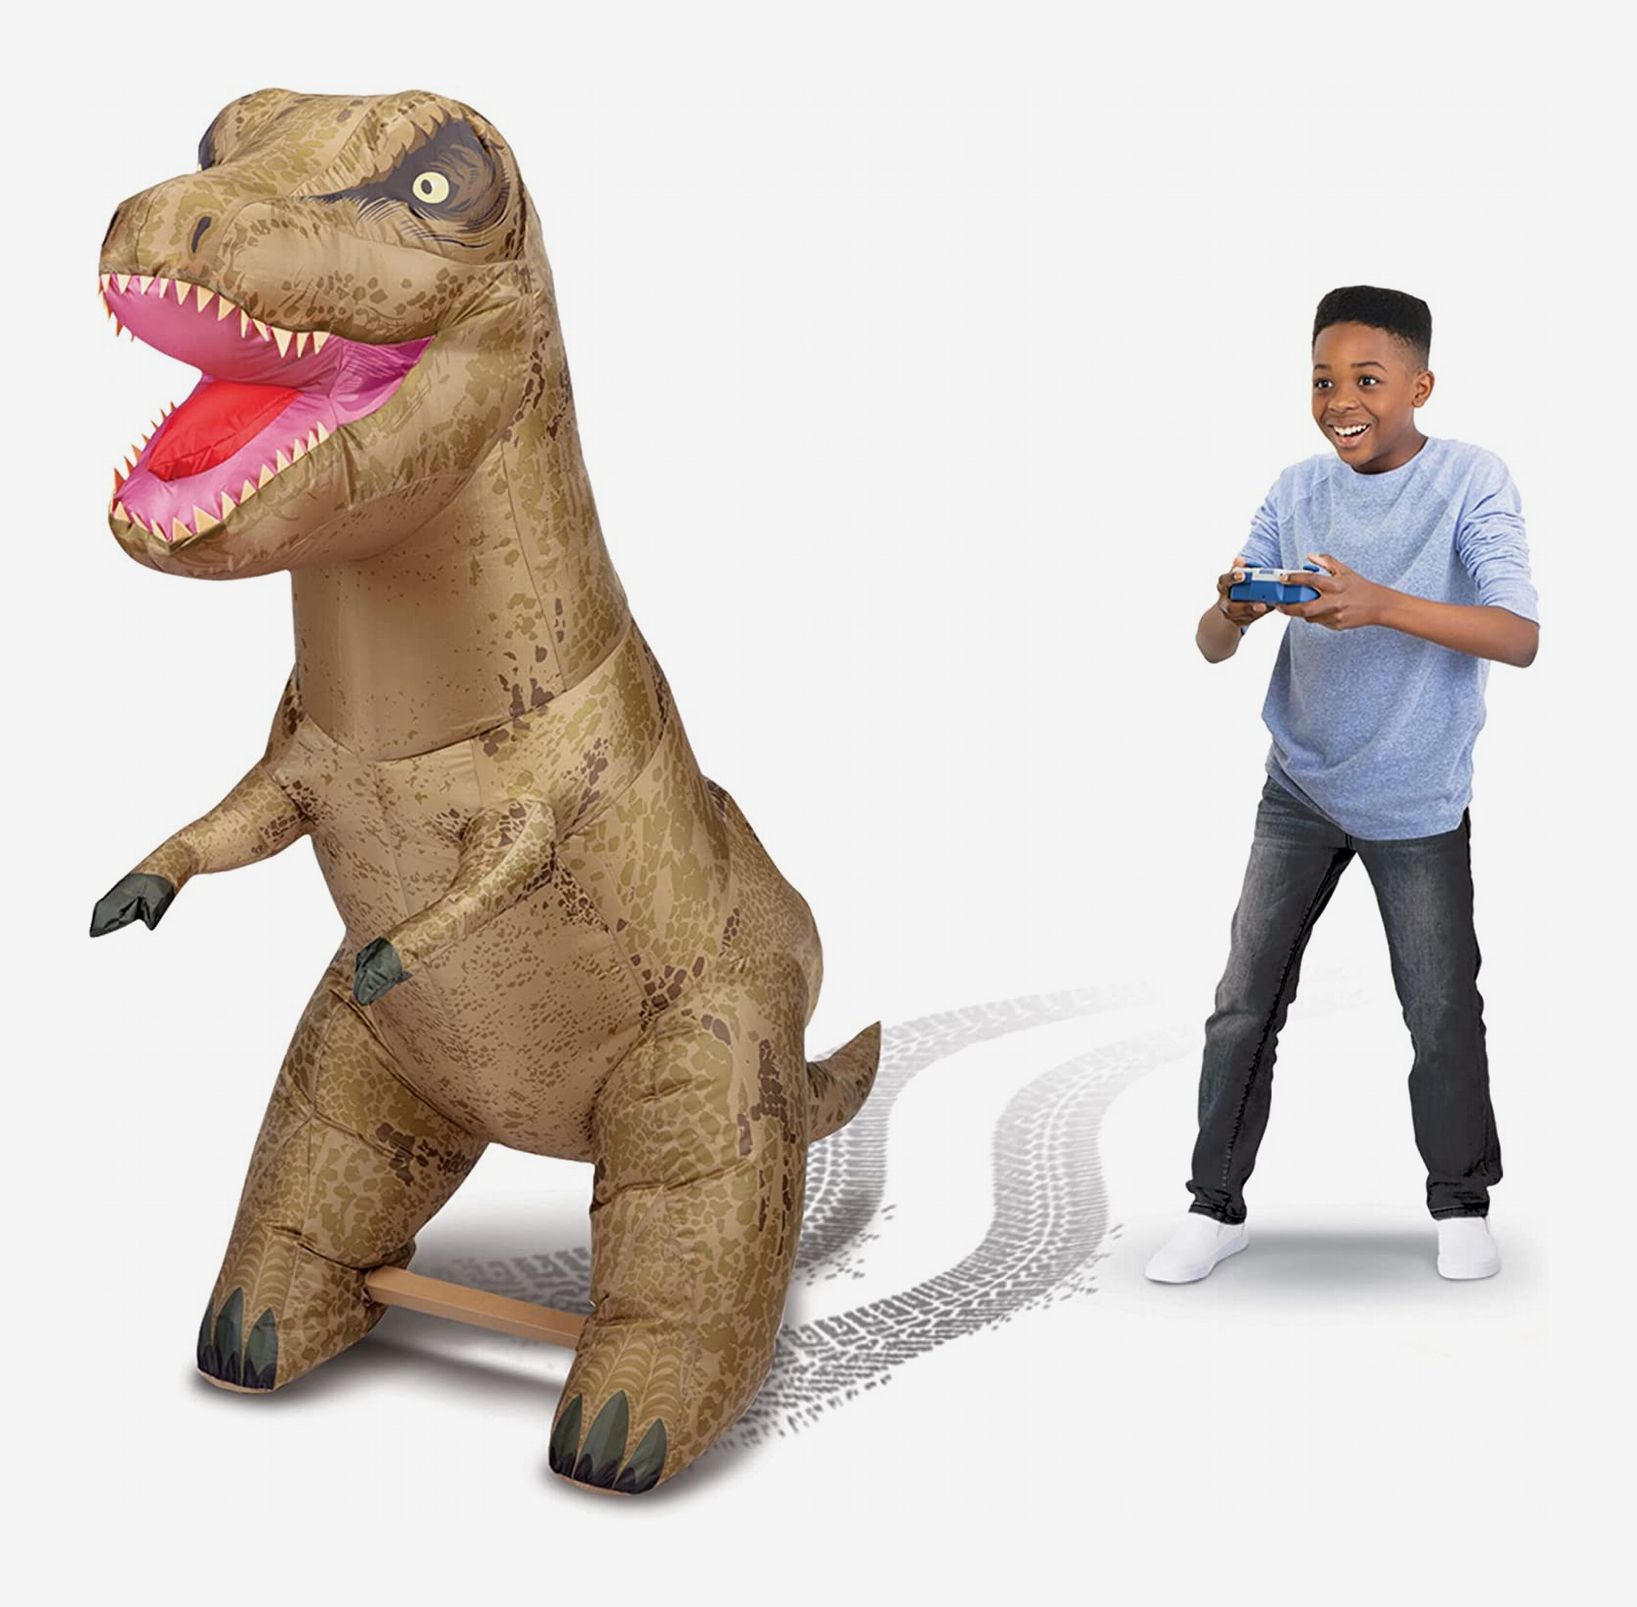 The 25 Most Popular Toys Kids Are Obsessed With This Christmas